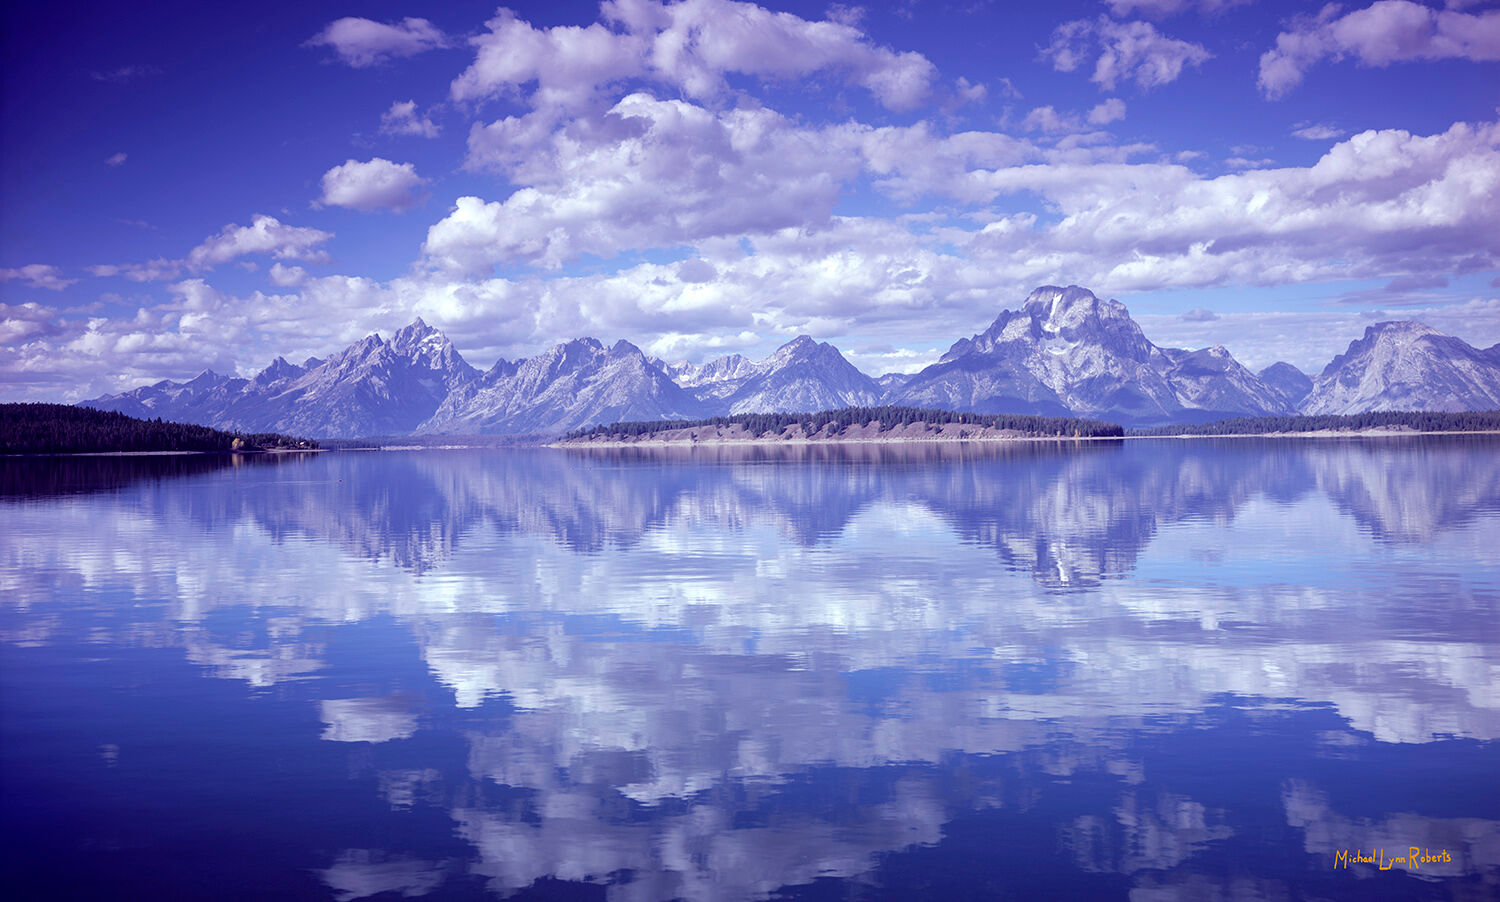 The Grand Teton Mountain range reflected in Jackson Lake along with a sky full of puffy white clouds.